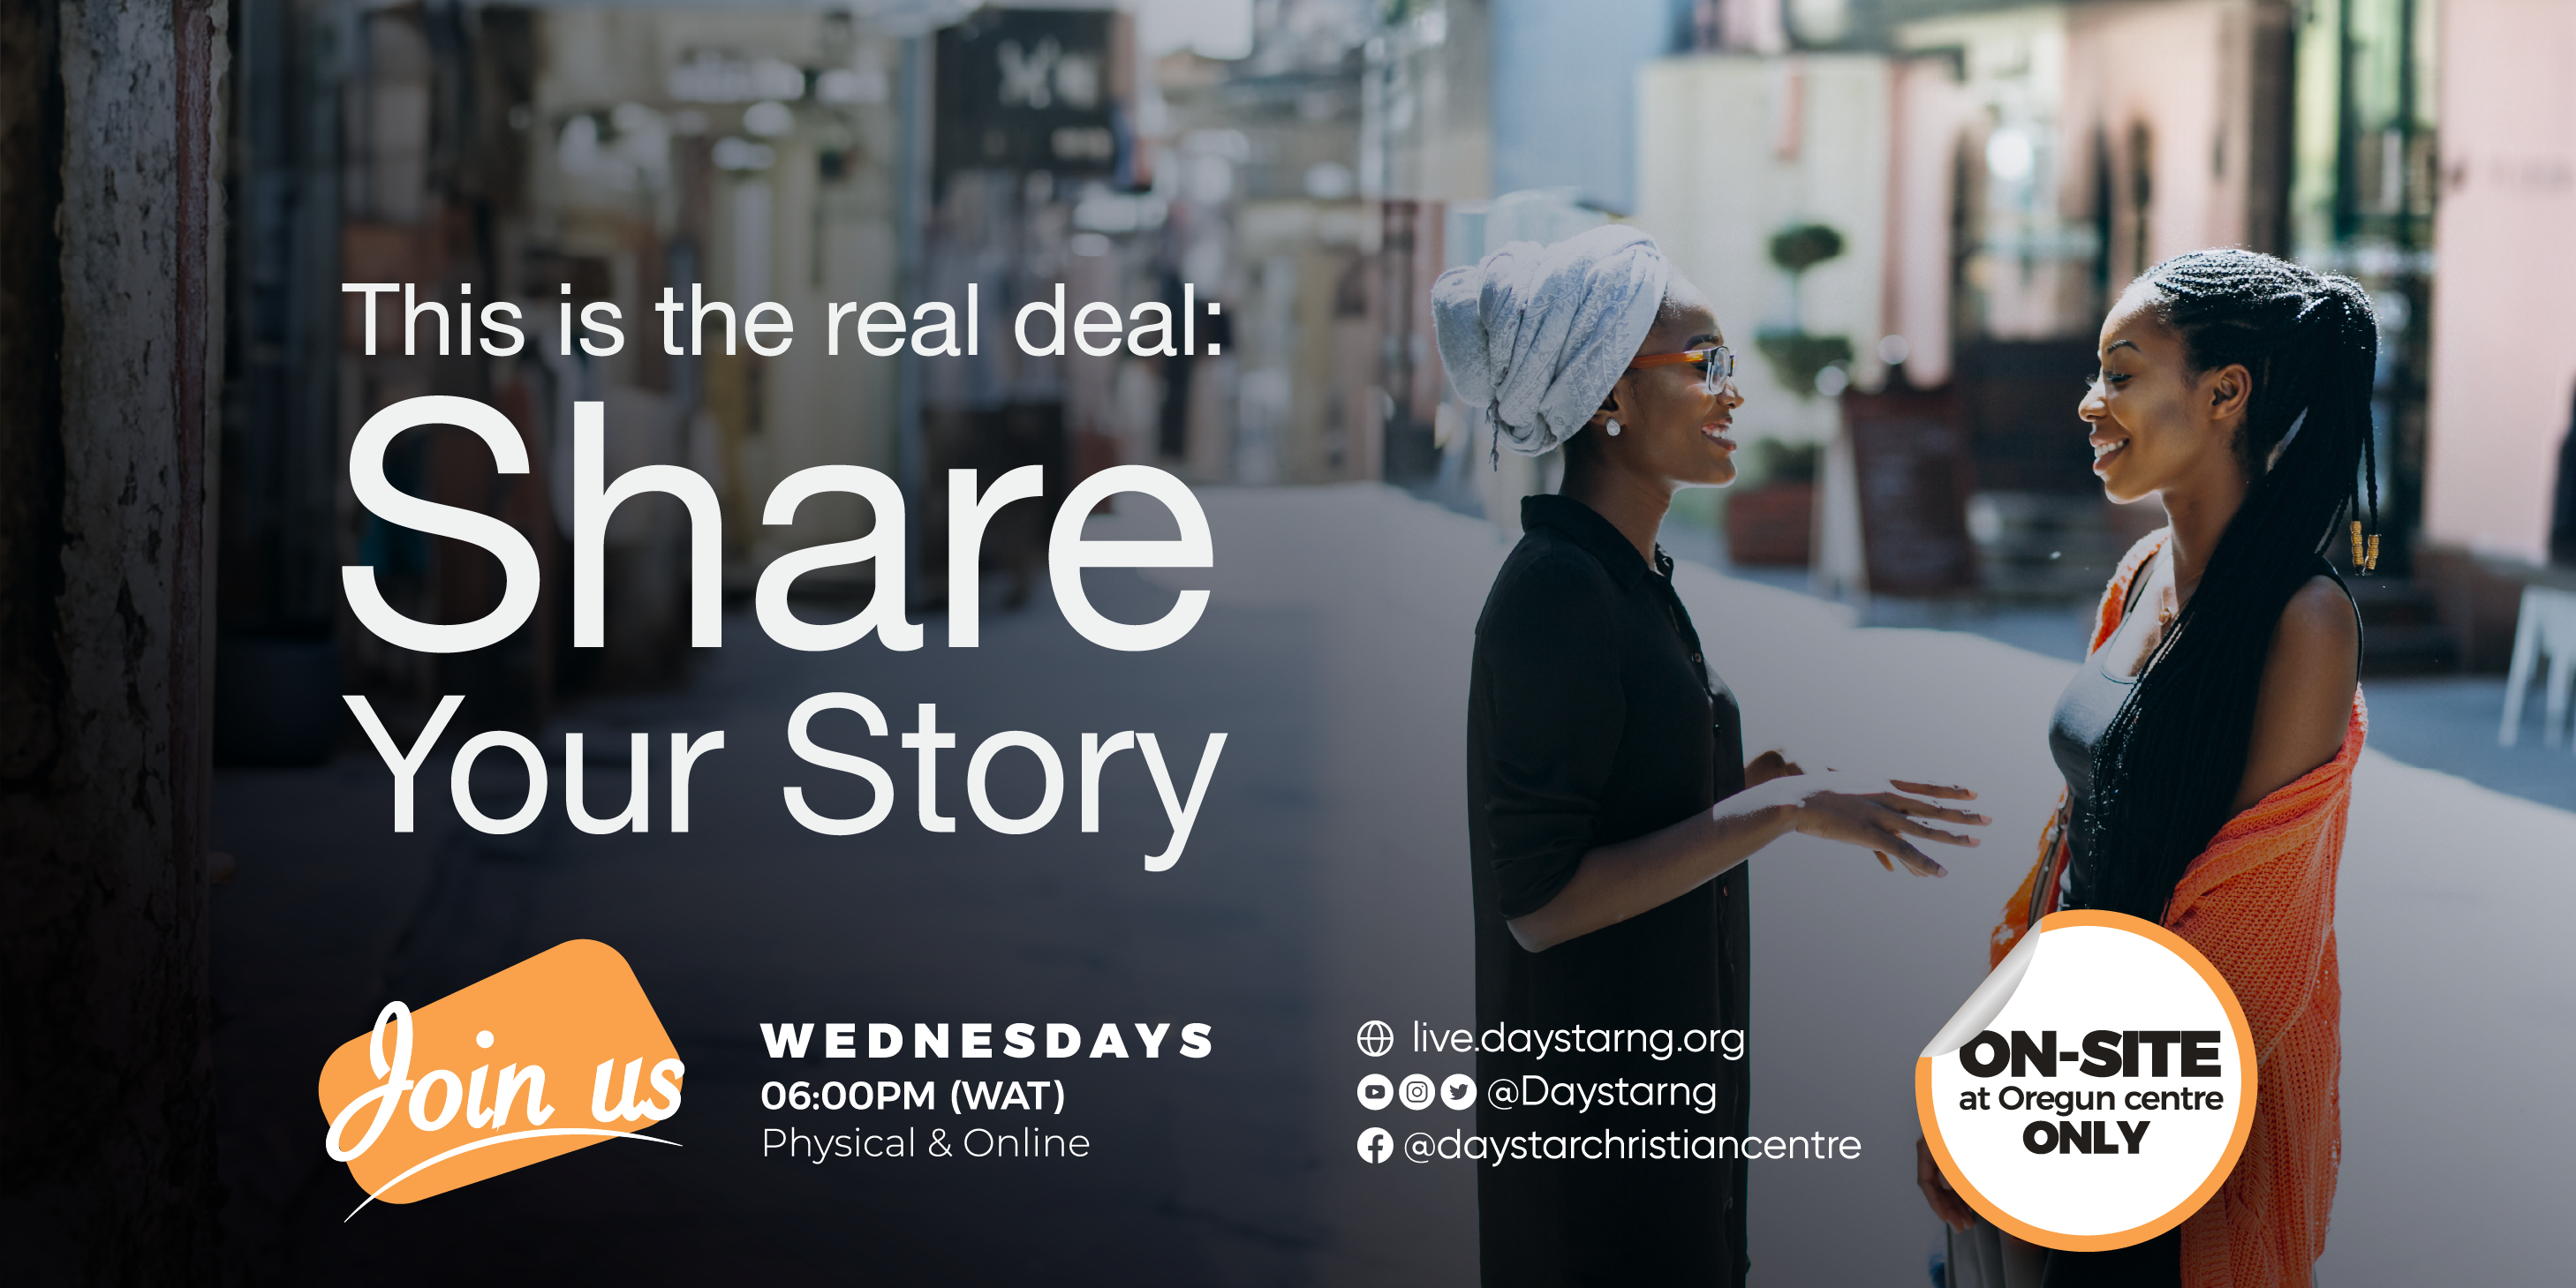 This is the real deal: Share your story